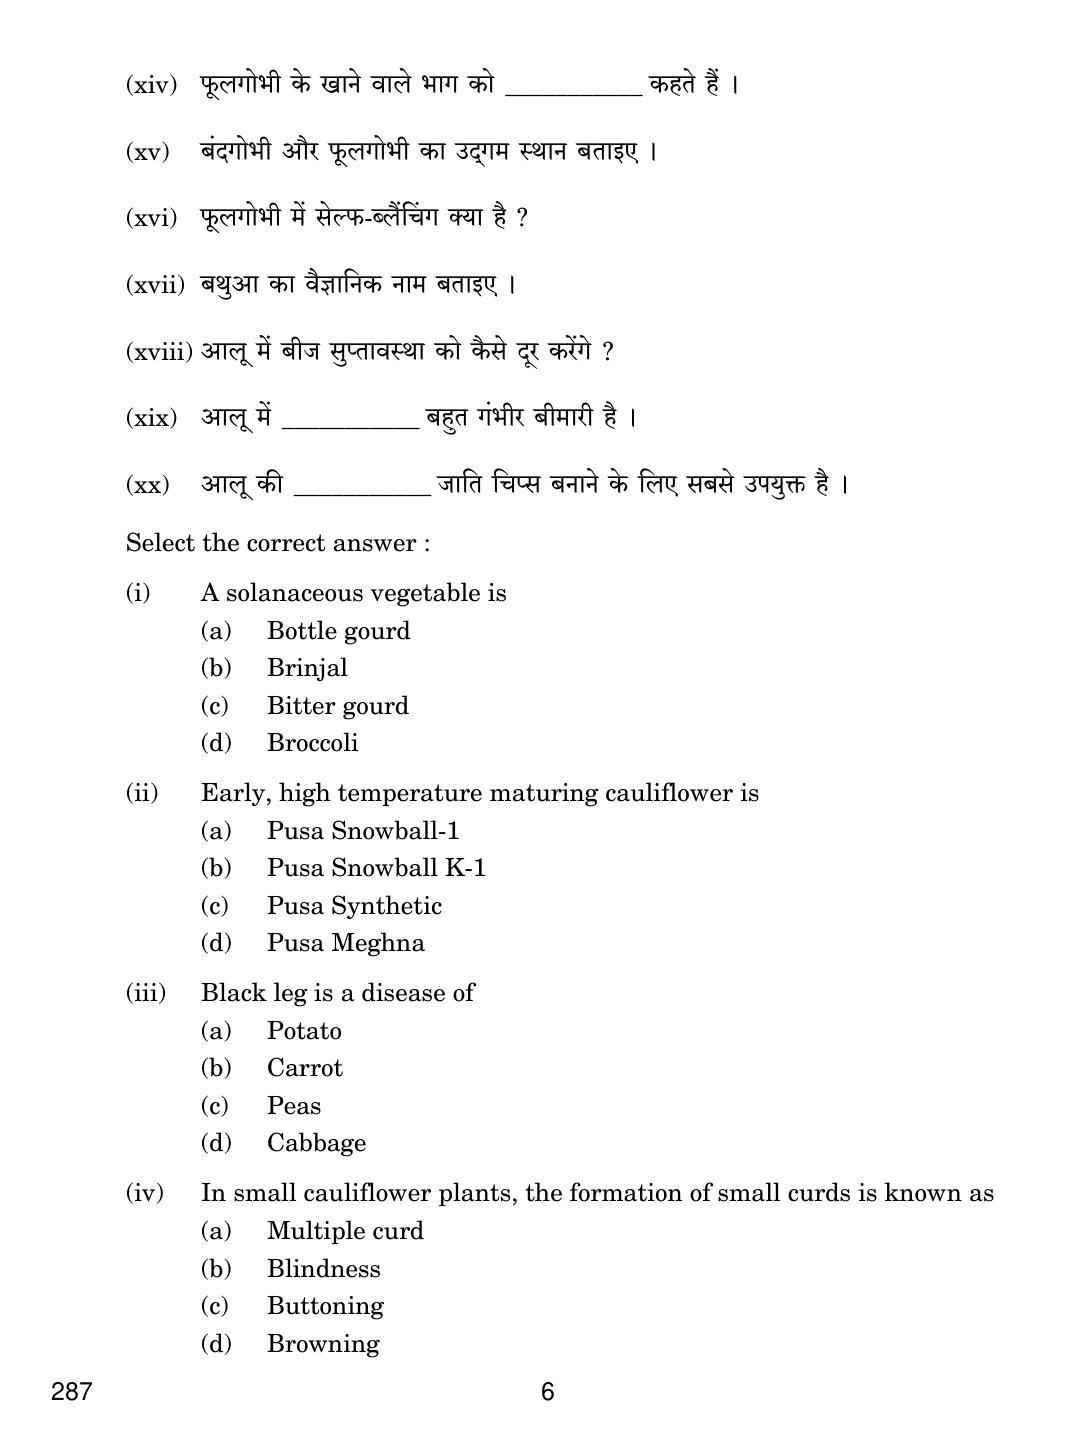 CBSE Class 12 287 OLERICULTURE 2018 Question Paper - Page 6